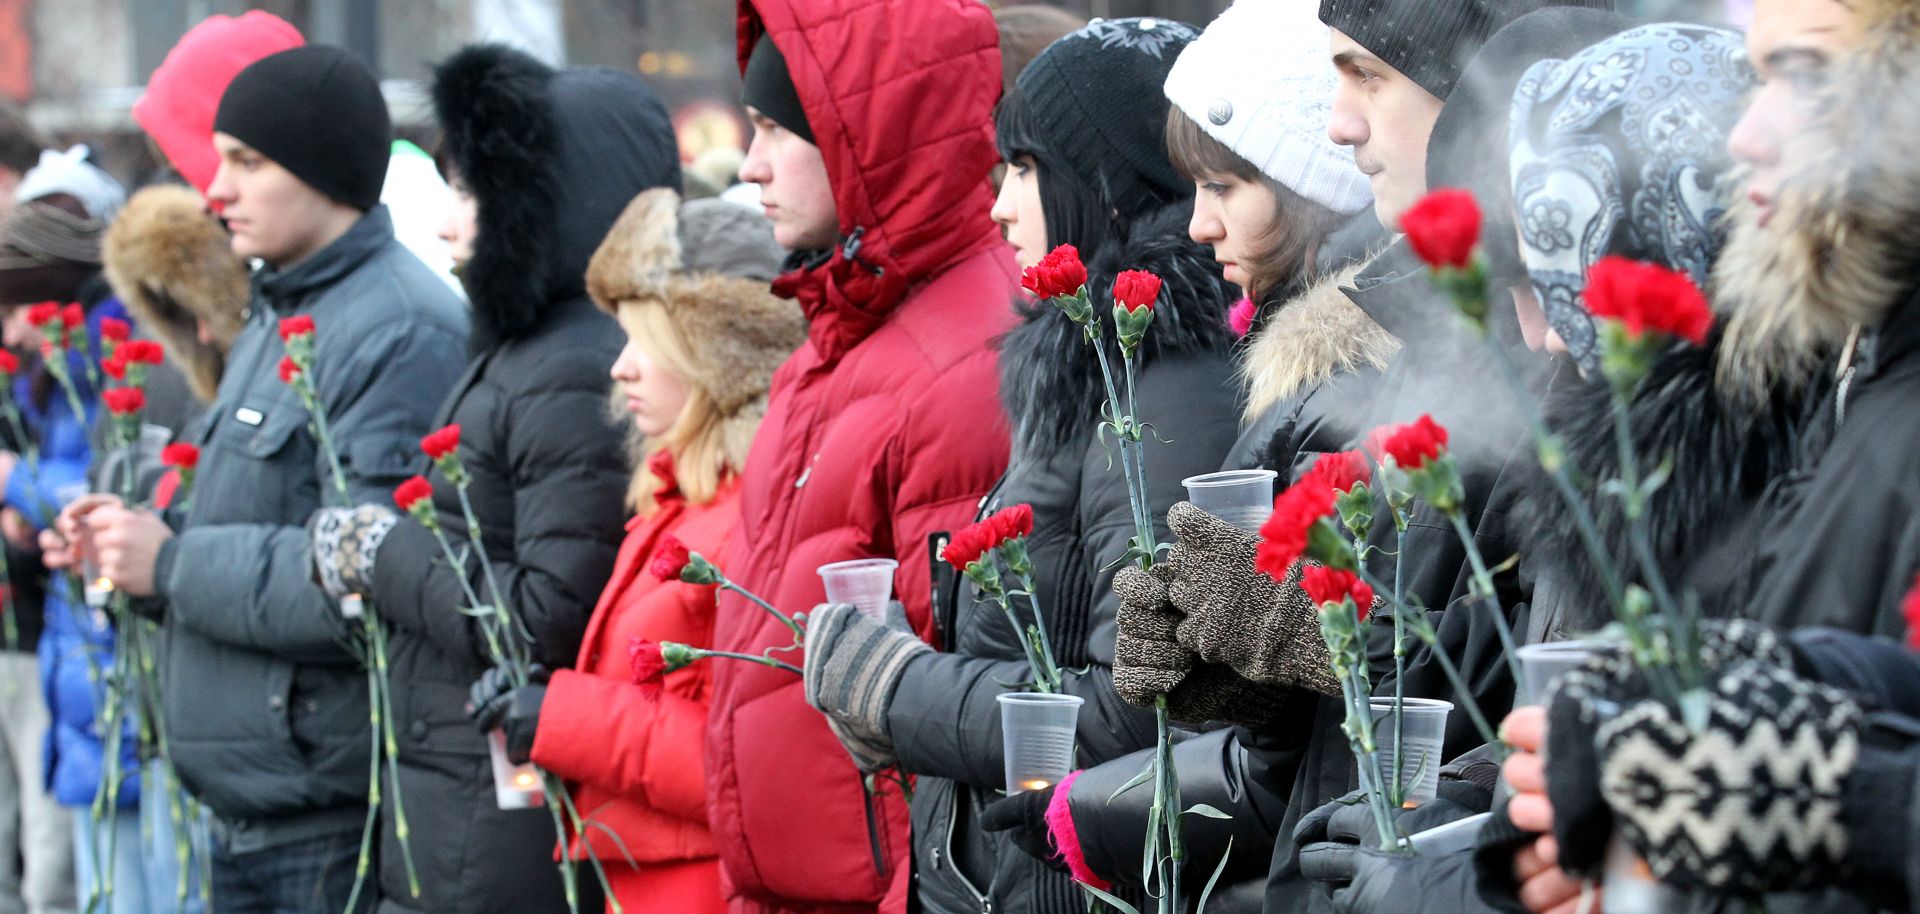 People hold flowers in central Moscow.